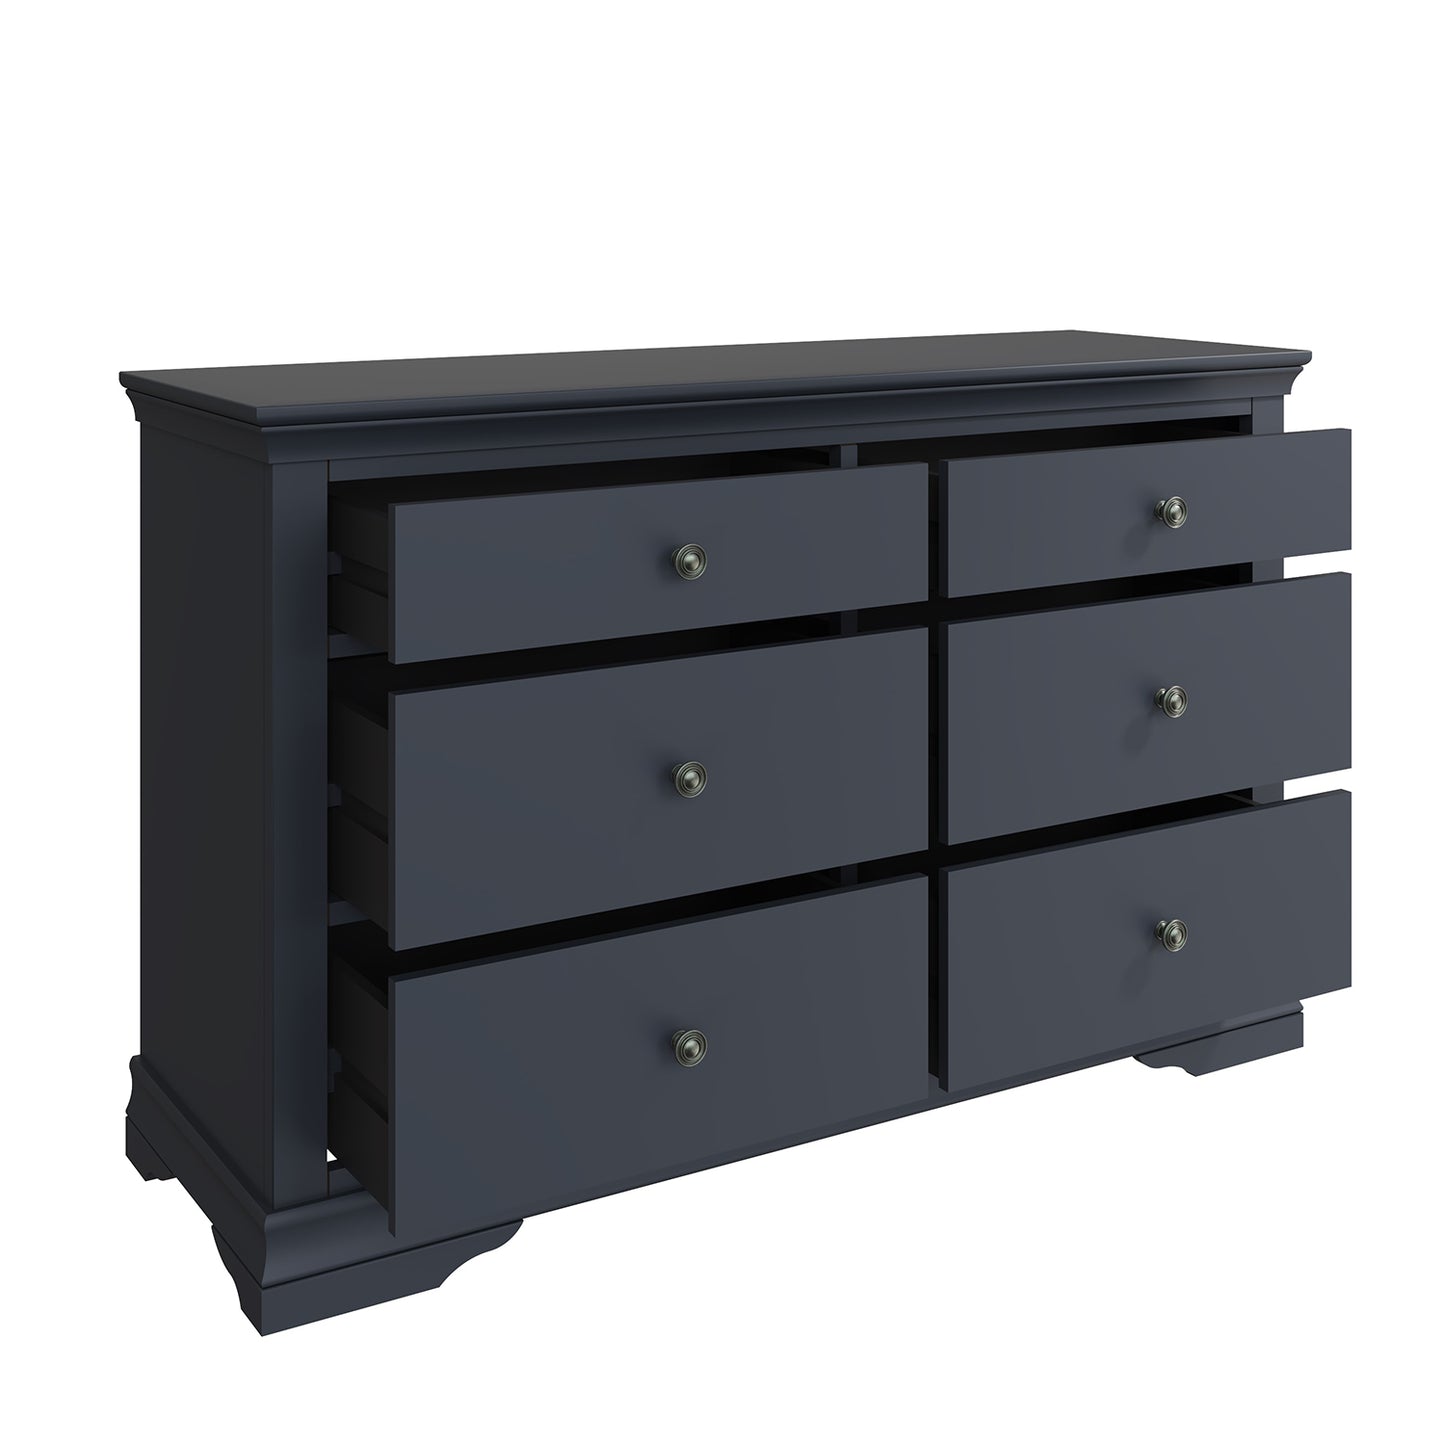 Toulouse Midnight Grey Chest Of Drawers - 6 Drawer Chest